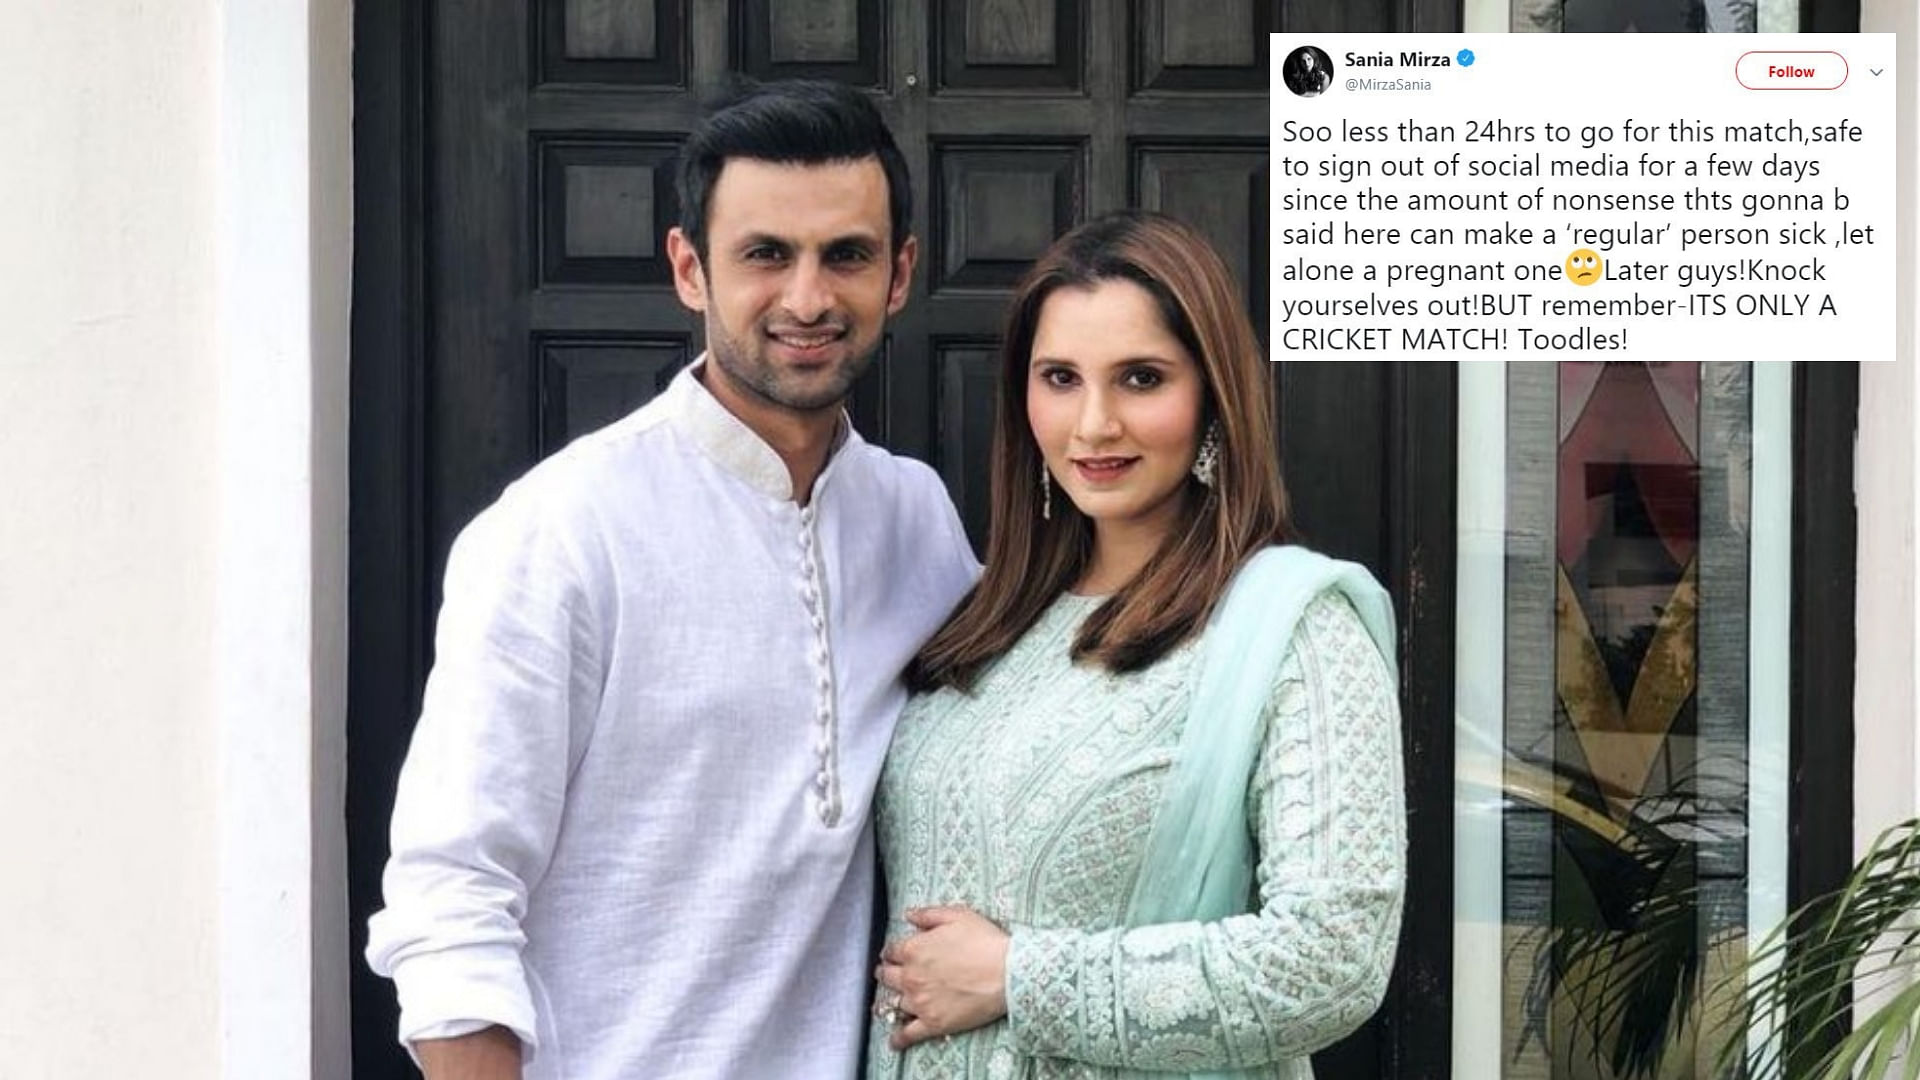 Tennis champion Sania Mirza decided to sign out of her social media accounts ahead of the India-Pakistan match.